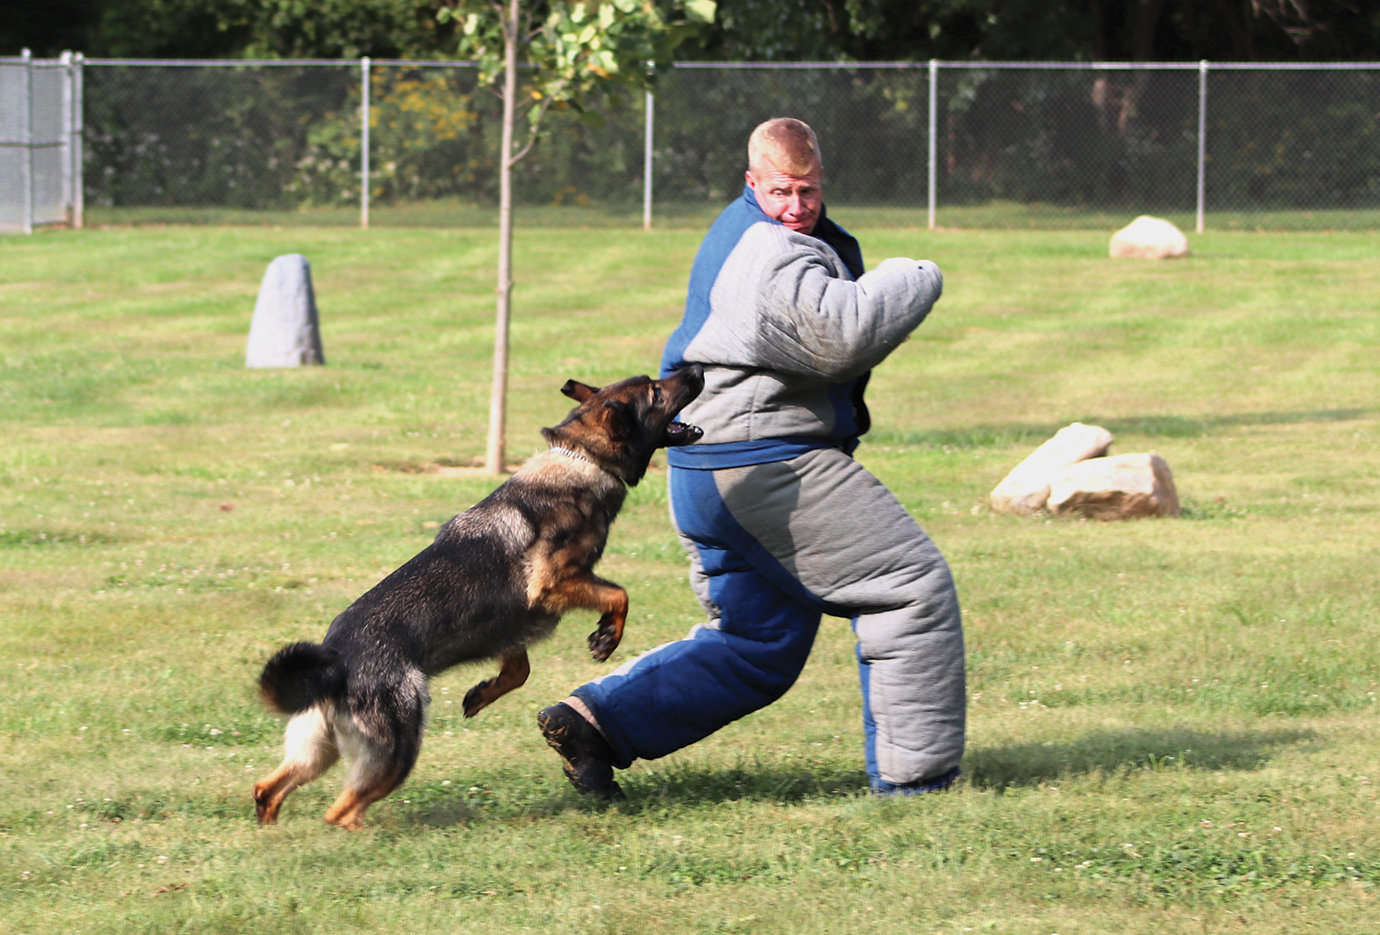 Officer Russ Keller of the Crawfordsville Police Department plays the part of a dangerous criminal Tuesday as K9 Officer Draco pursues his target. A week-long training seminar for K9 officers and their handlers is taking place this week at multiple locations around Crawfordsville. Master trainers and law enforcement officials from around the Midwest are taking part to bestow successful participants with a certification from the North American Police Work Dog Association. A story and additional photos will appear in an upcoming issue of the Journal Review.